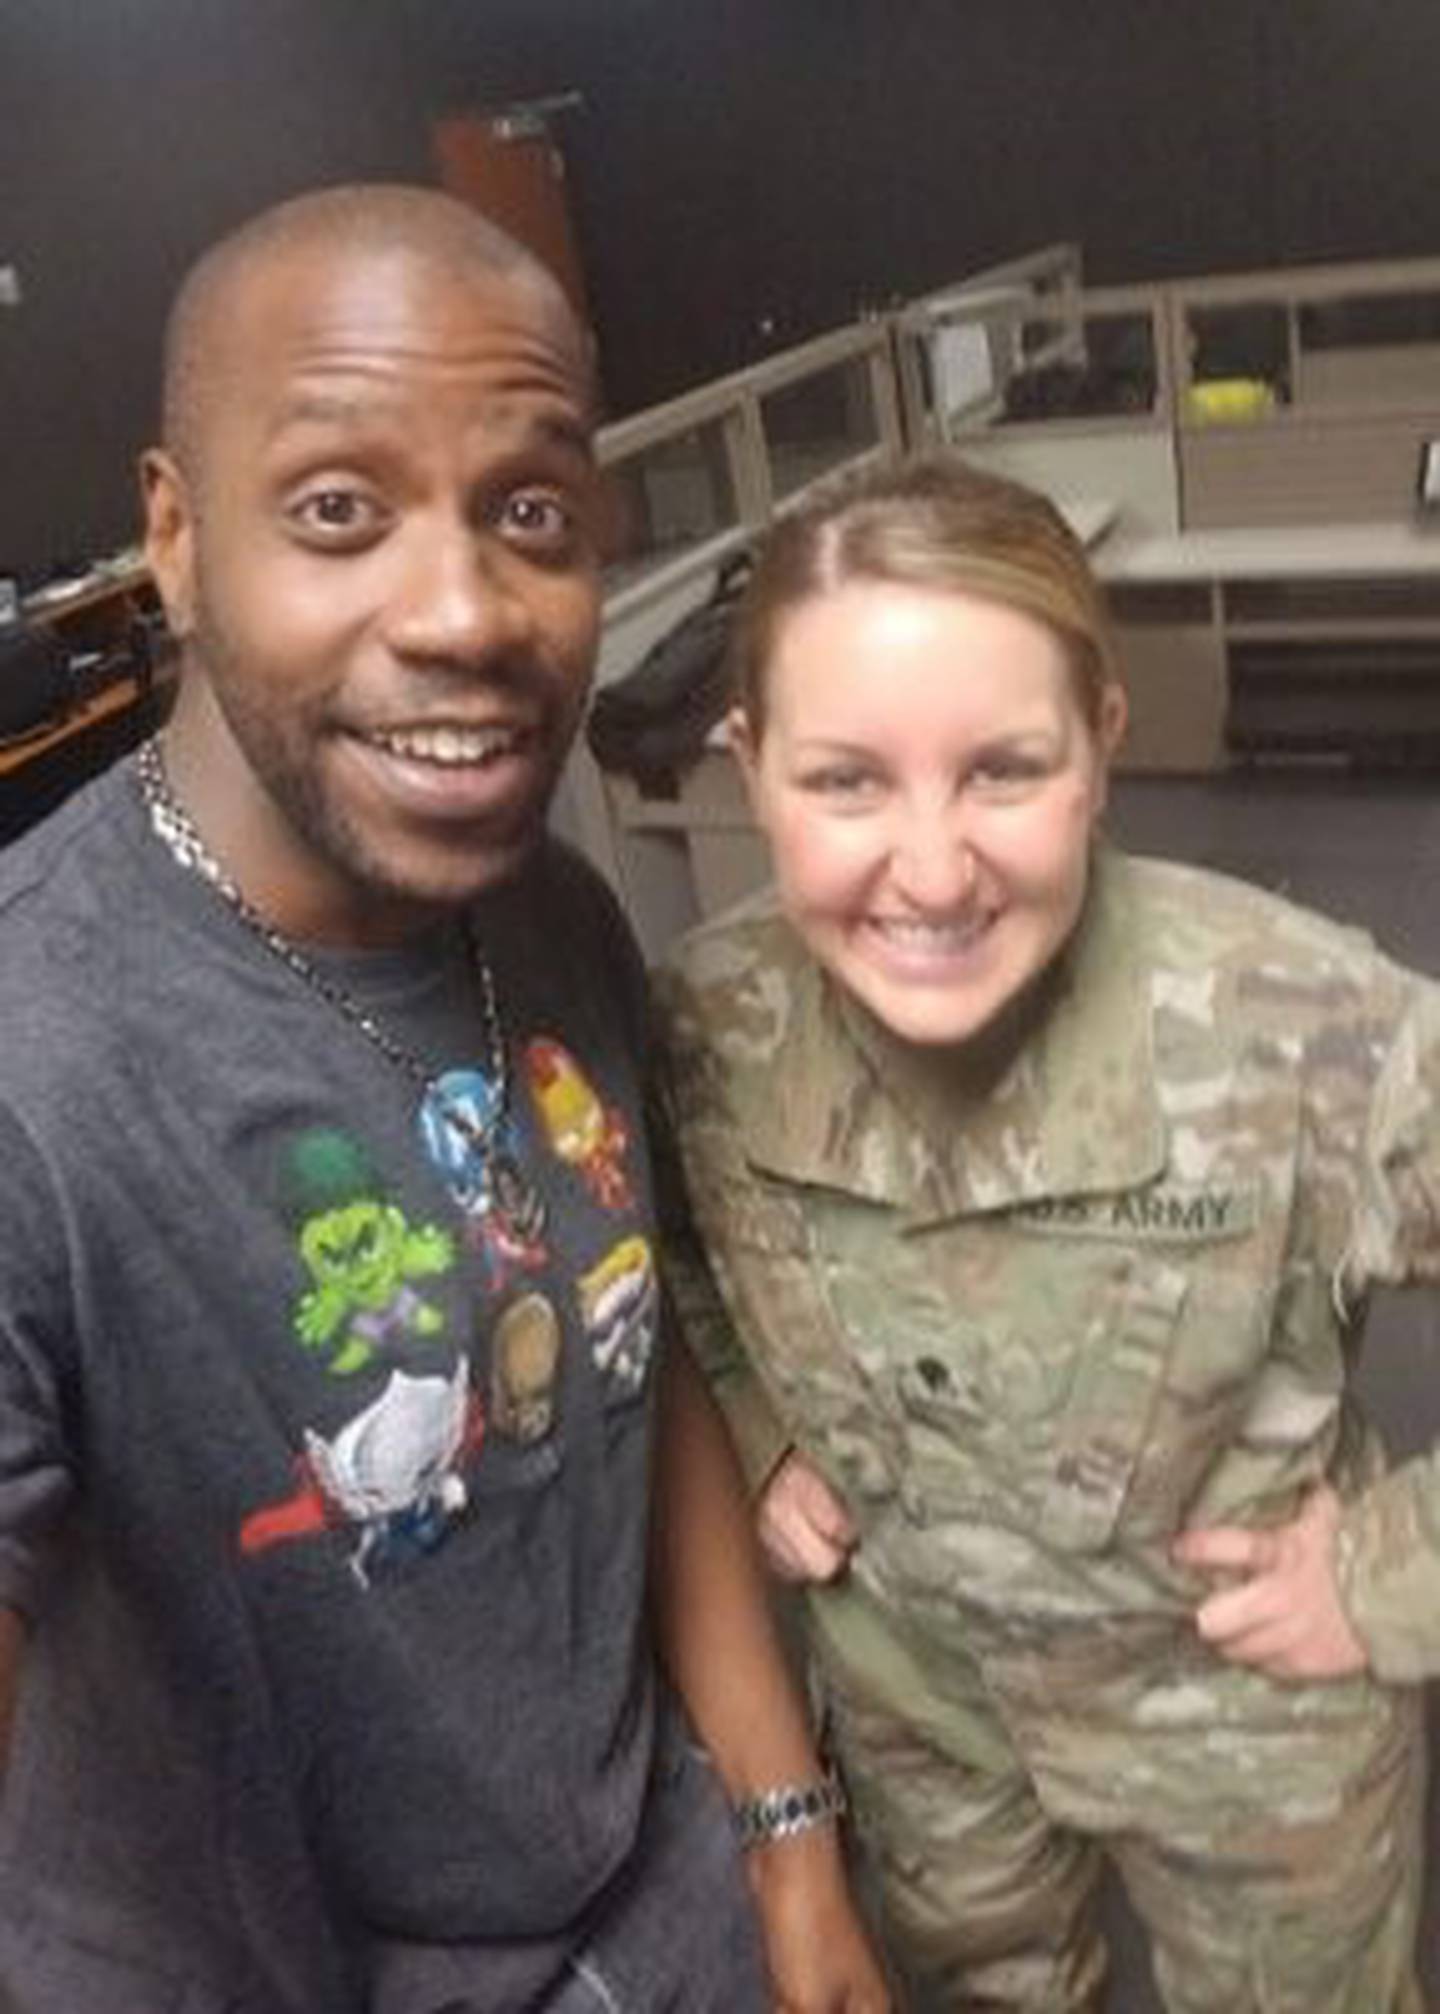 Chazz Gilbert, left, and Noelle Wiehe reunite at the U.S. Army’s Maneuver Center of Excellence at Fort Benning, Georgia, after completing advanced individual training at the U.S. Army’s Defense Information School at Fort Meade, Maryland.